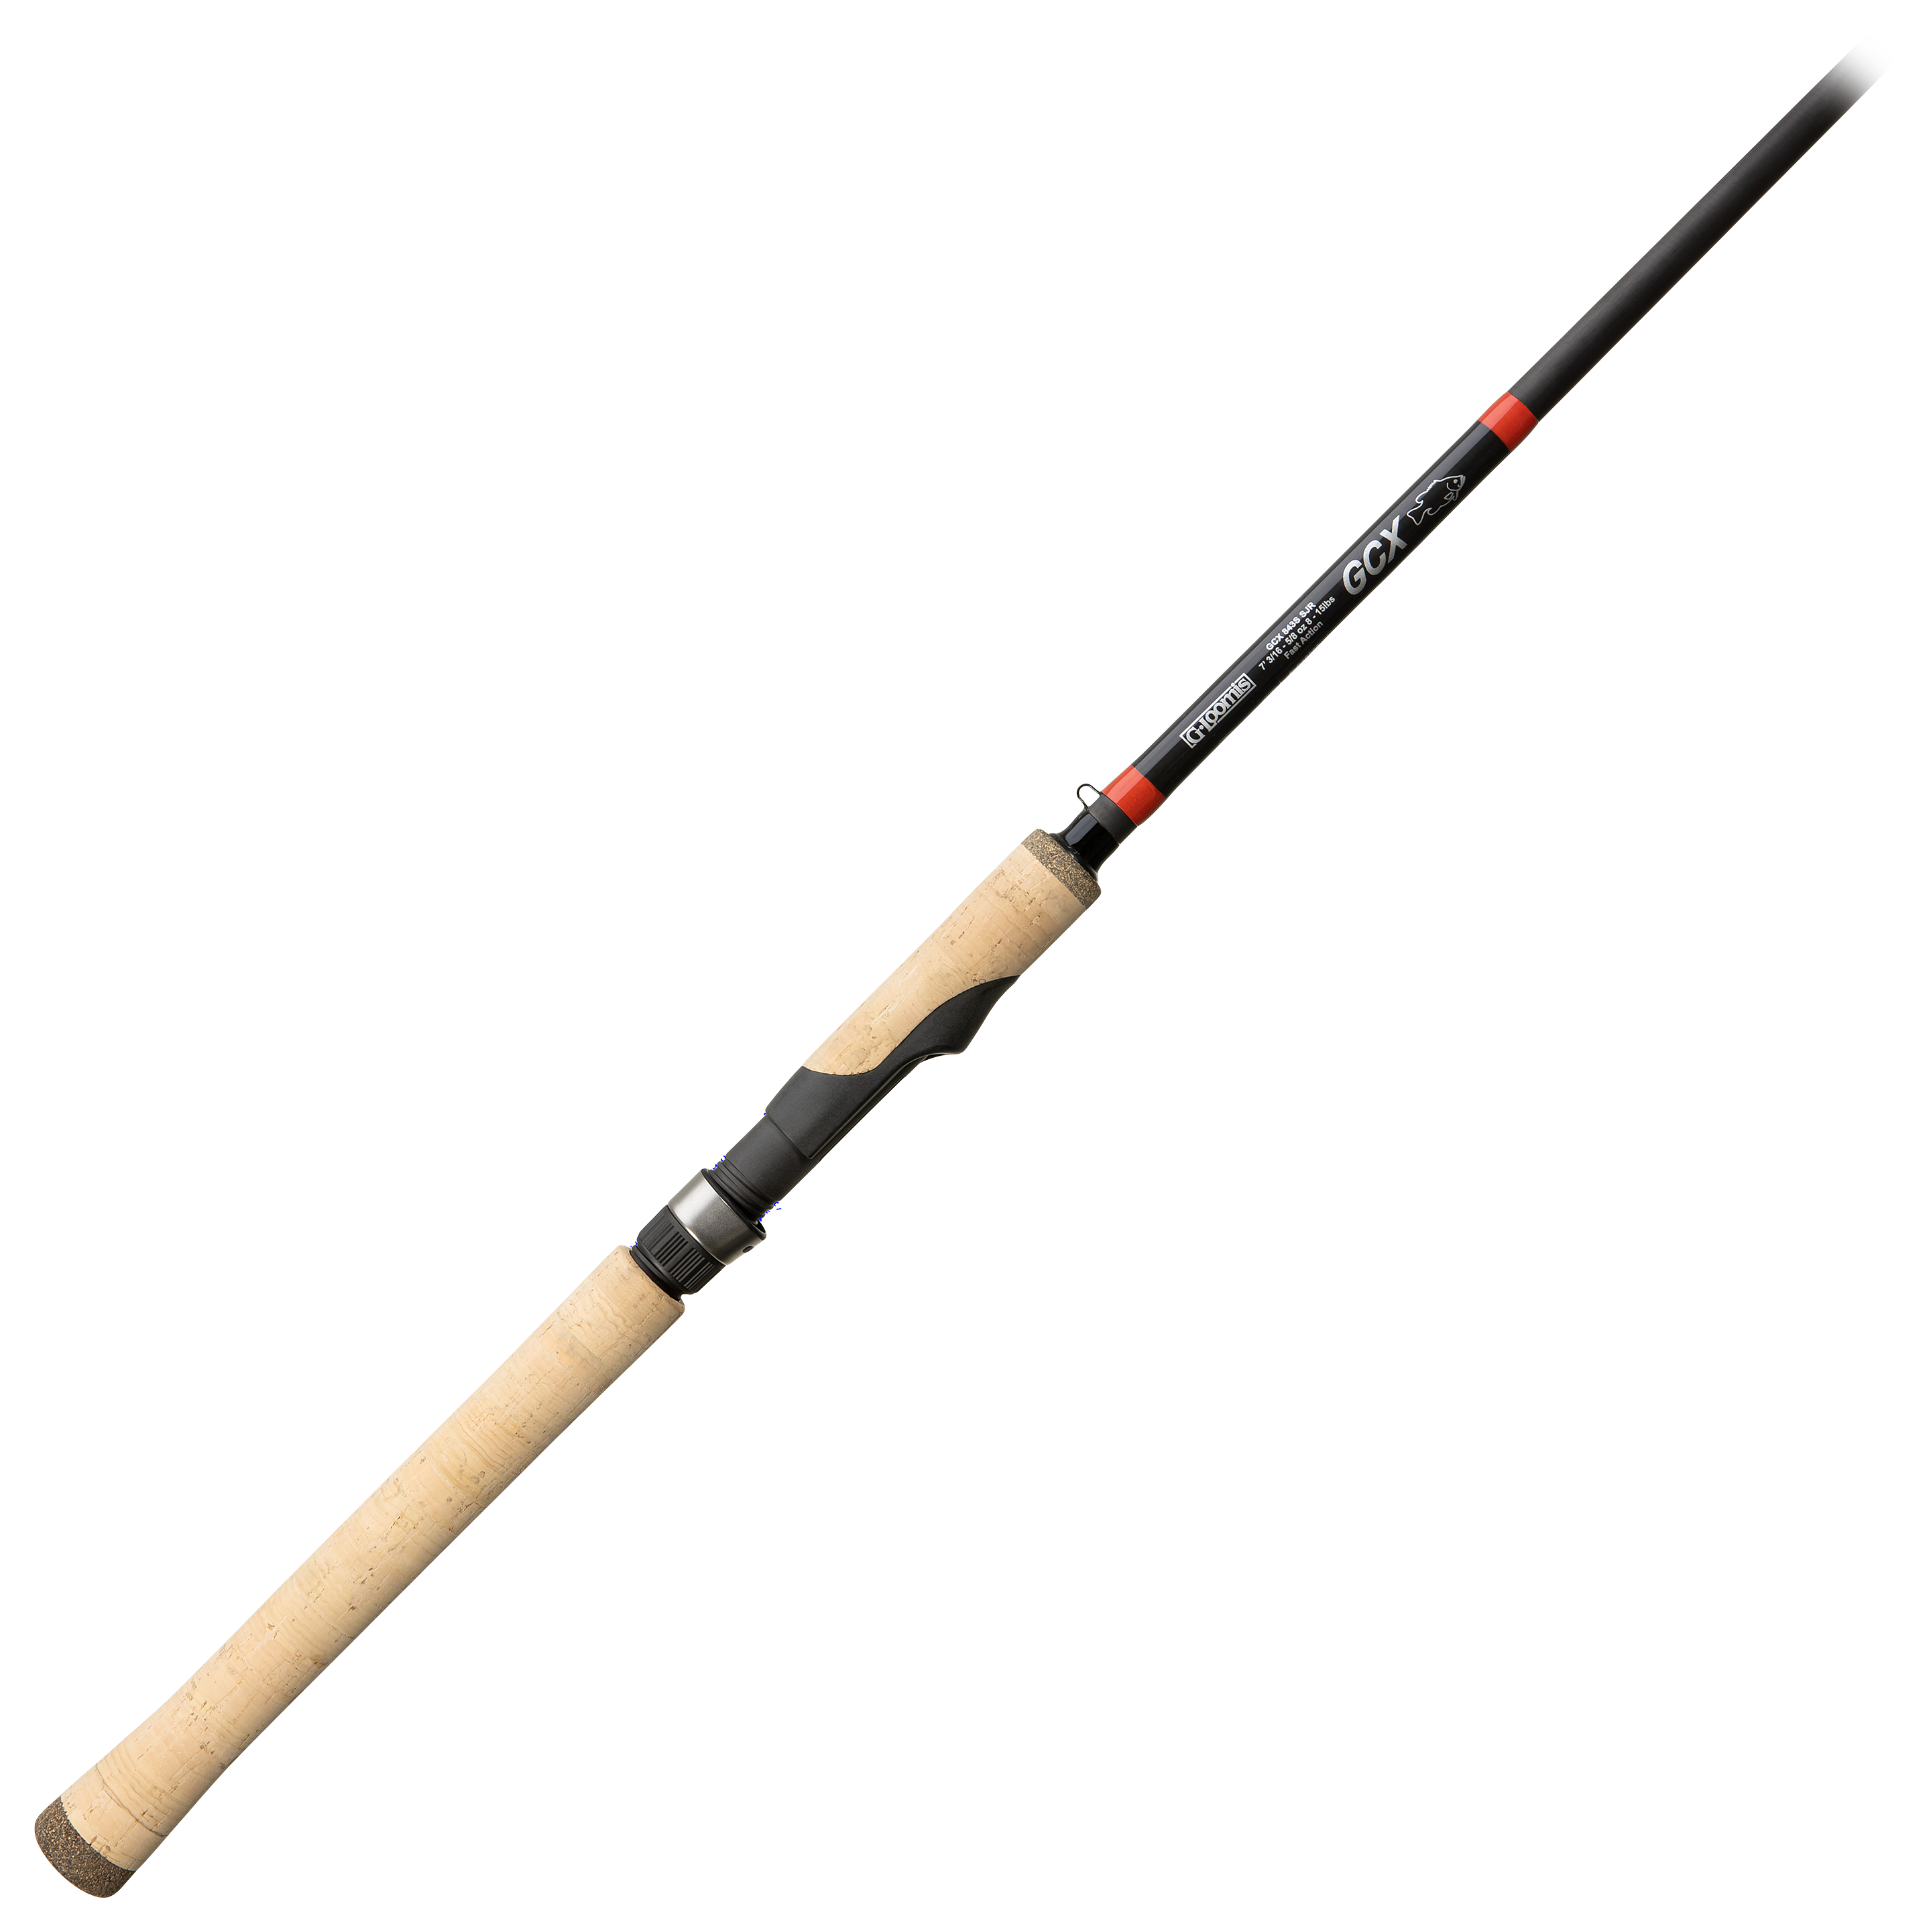 G.Loomis GCX Spin Jig Spinning Rod - Black and Red -  12952-01